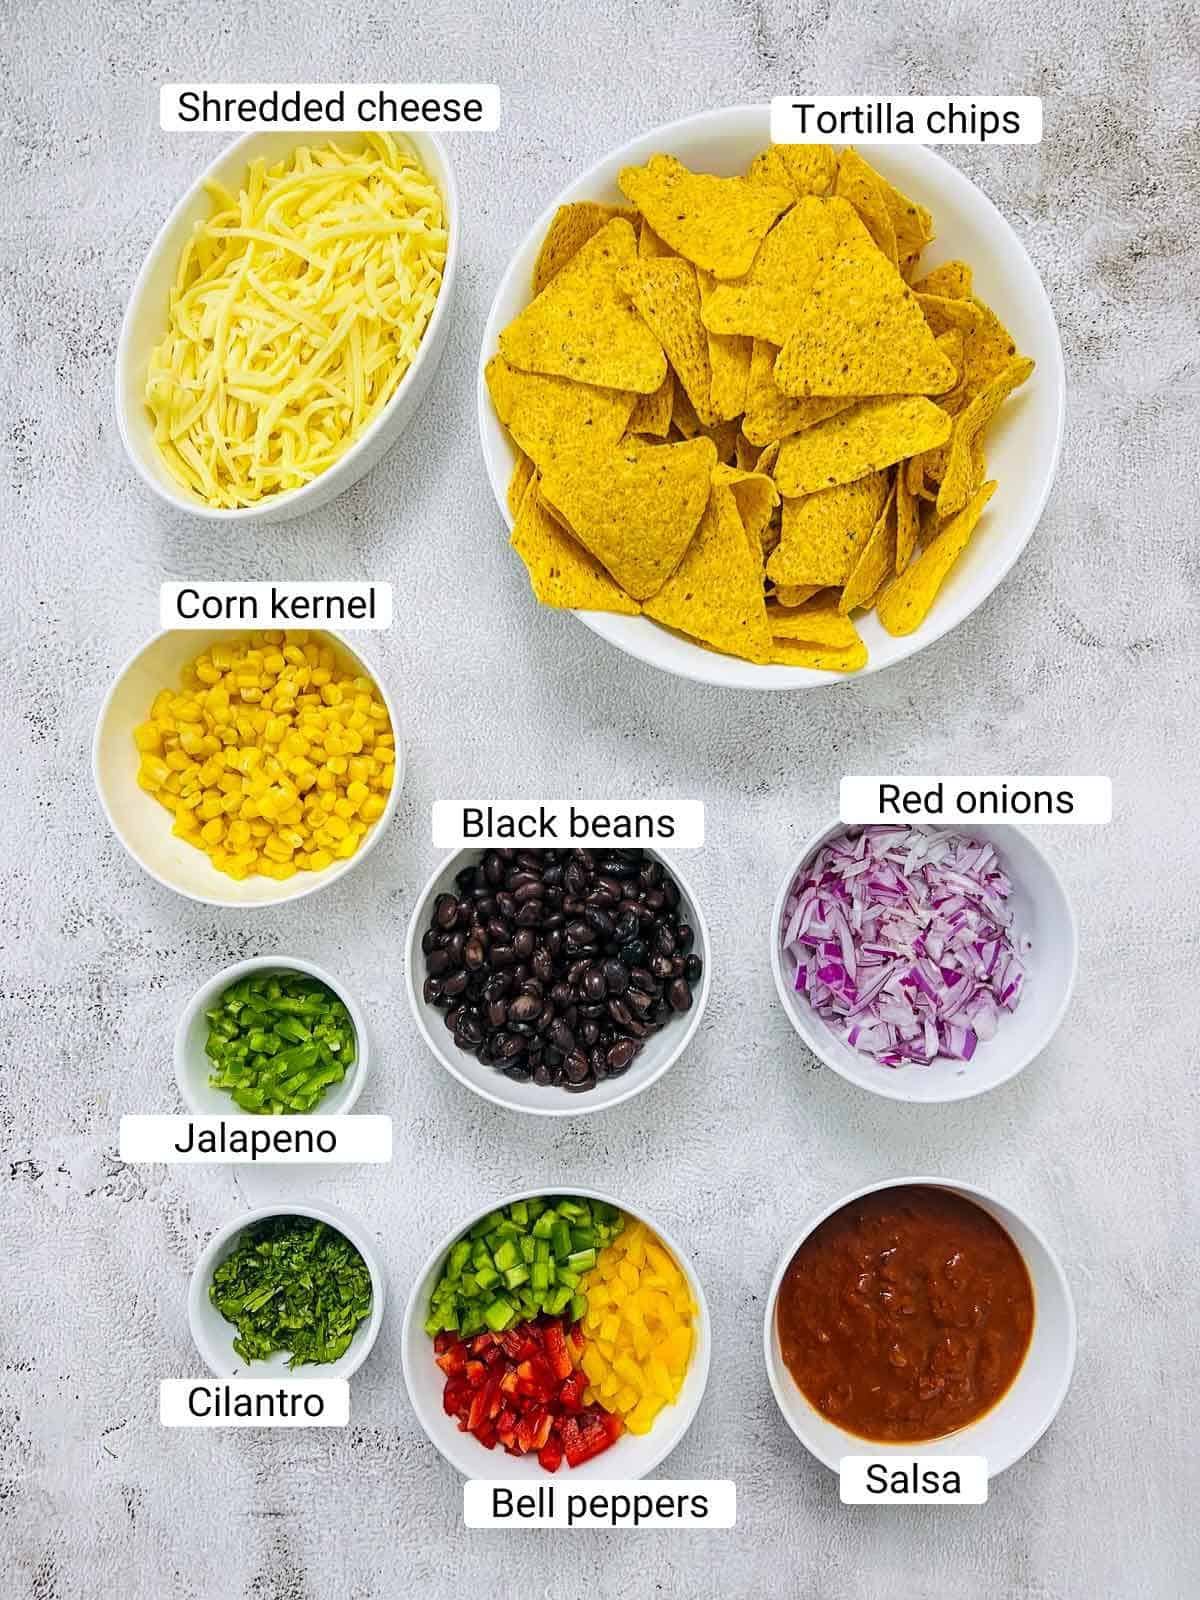 Ingredients to make loaded nachos on a white surface.